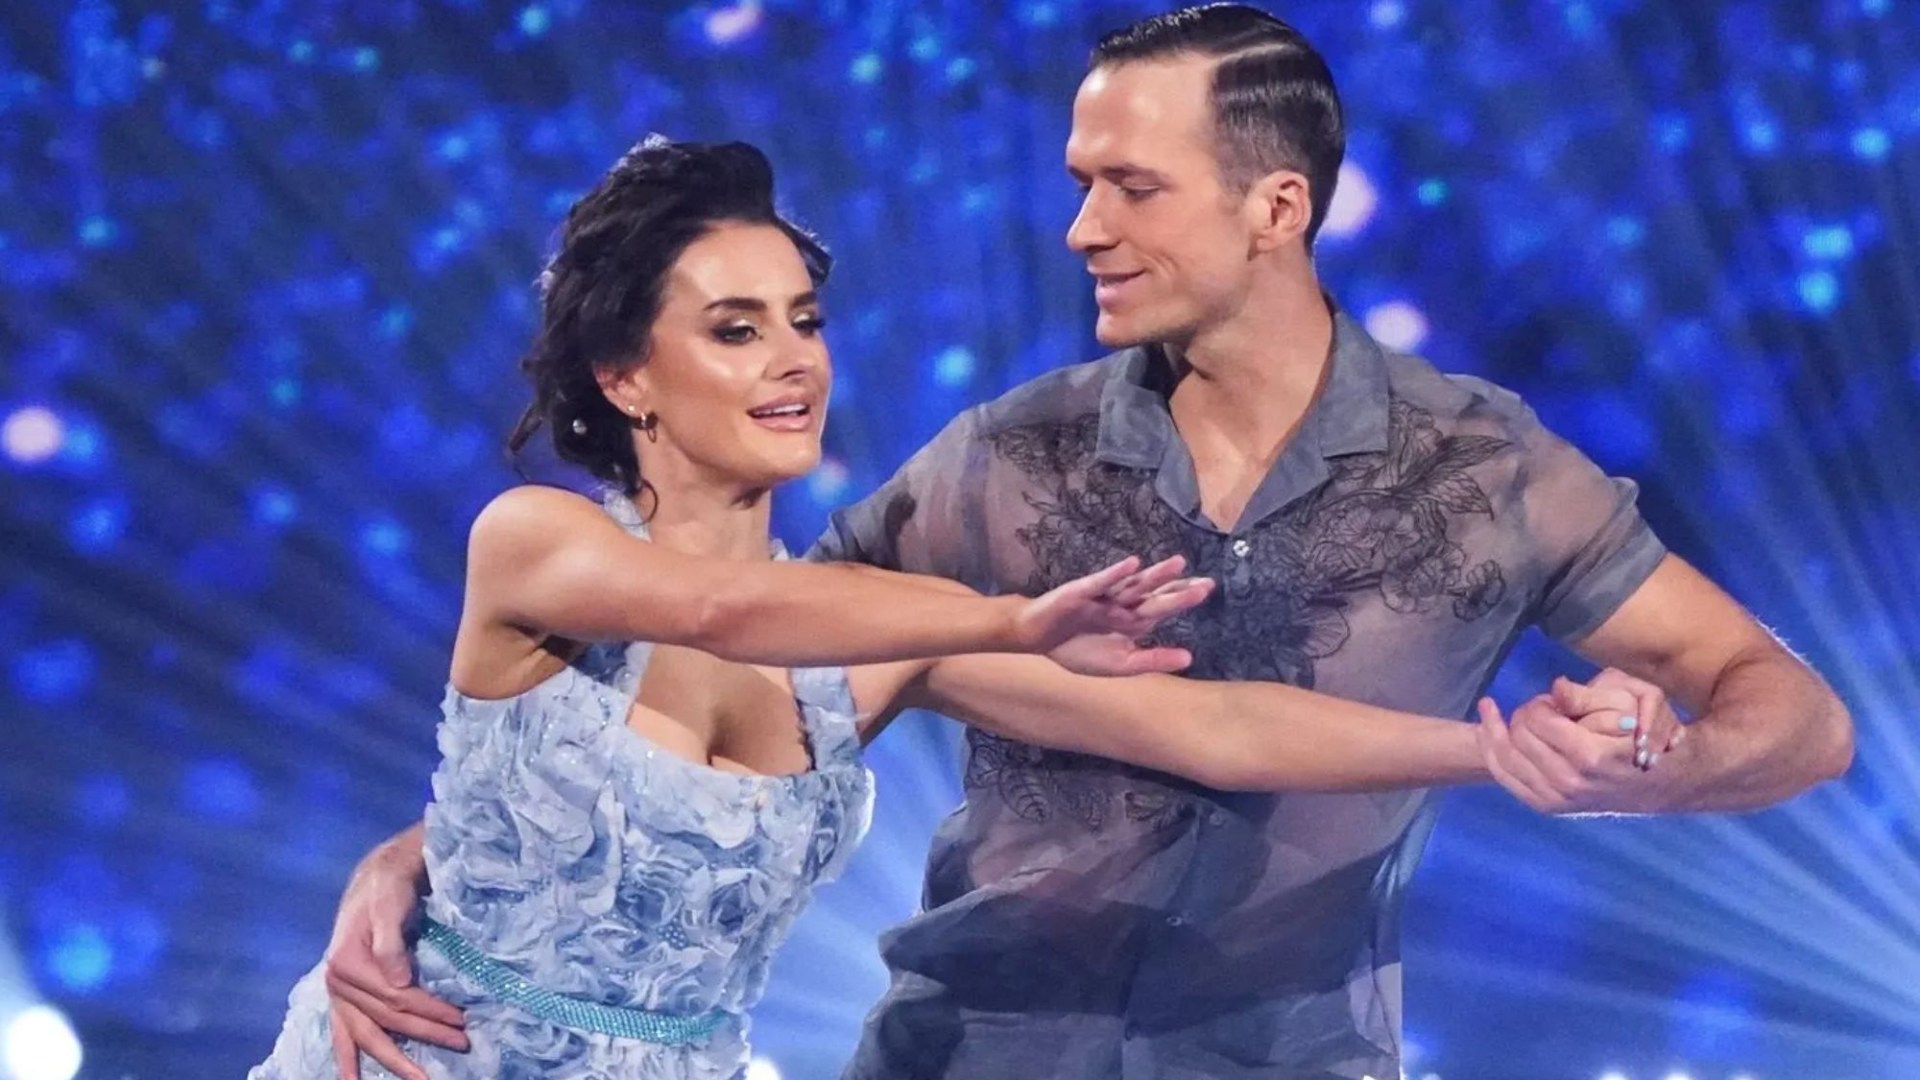 “Amber Davies’ Heart-Stopping Fall & Injury on Dancing On Ice – Will She Make It to the Final?” #AmberDavies #DancingOnIce #Injury #Finals